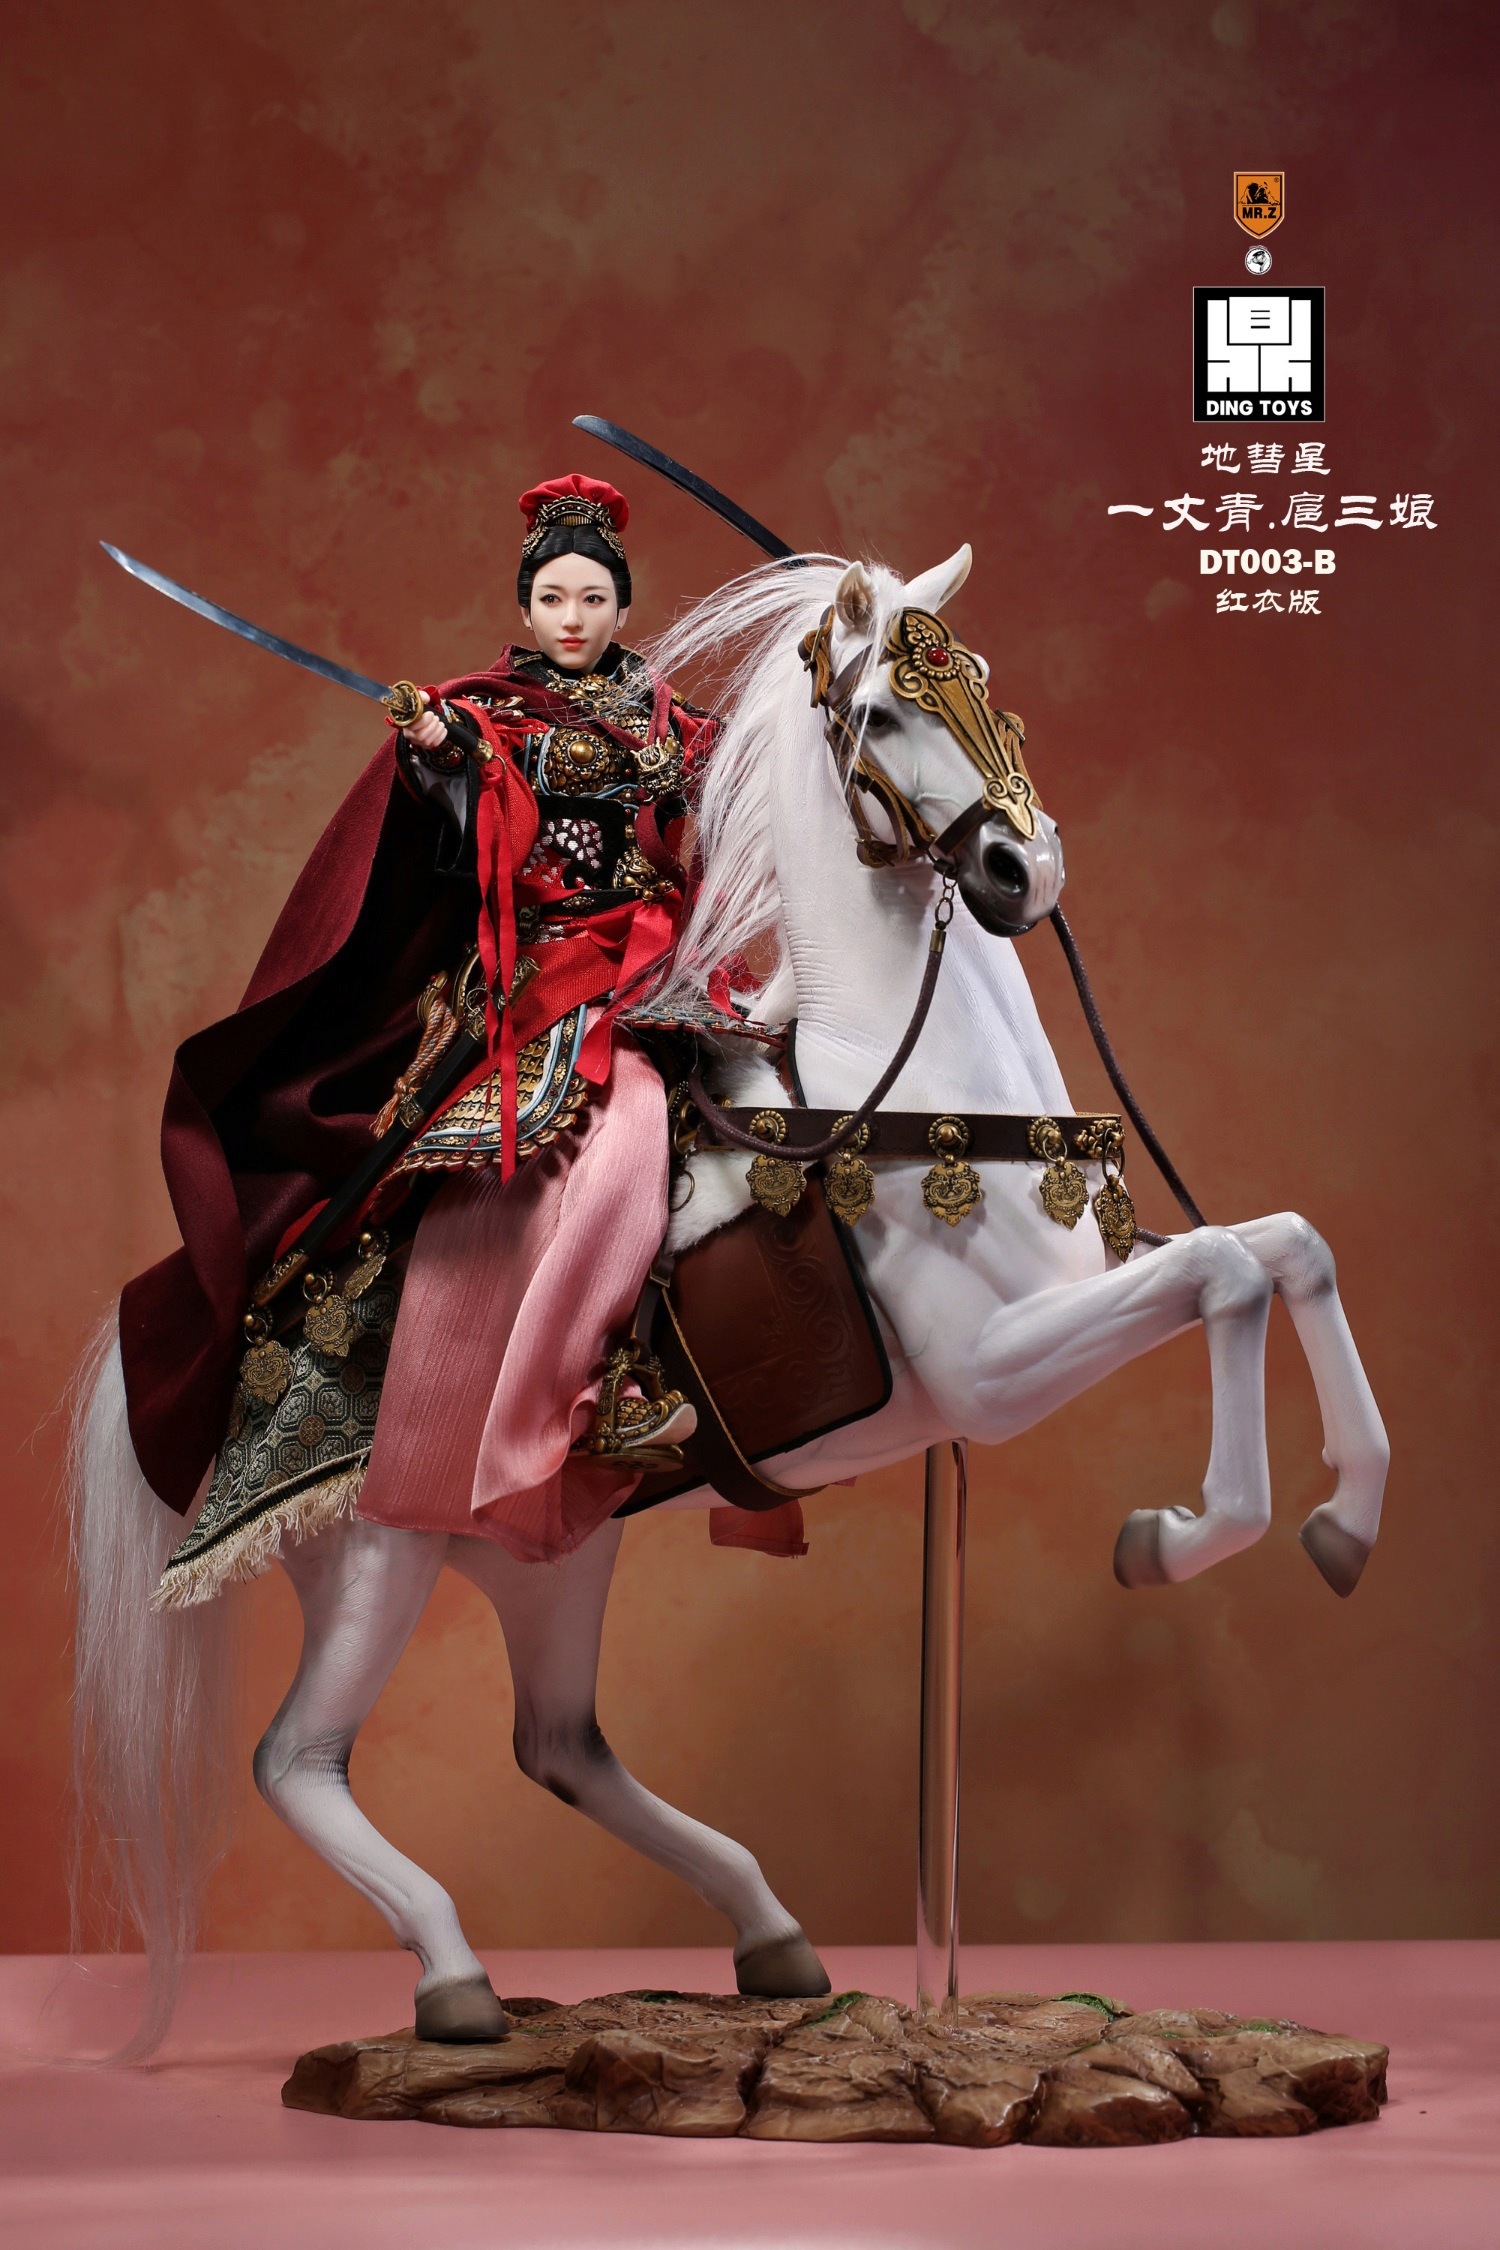 DingToys - NEW PRODUCT: Mr.Z x Ding Toys DT003 1/6 Scale 《Water Margin》Shiying Zhang (Green and Red versions), Horse (White) 4321